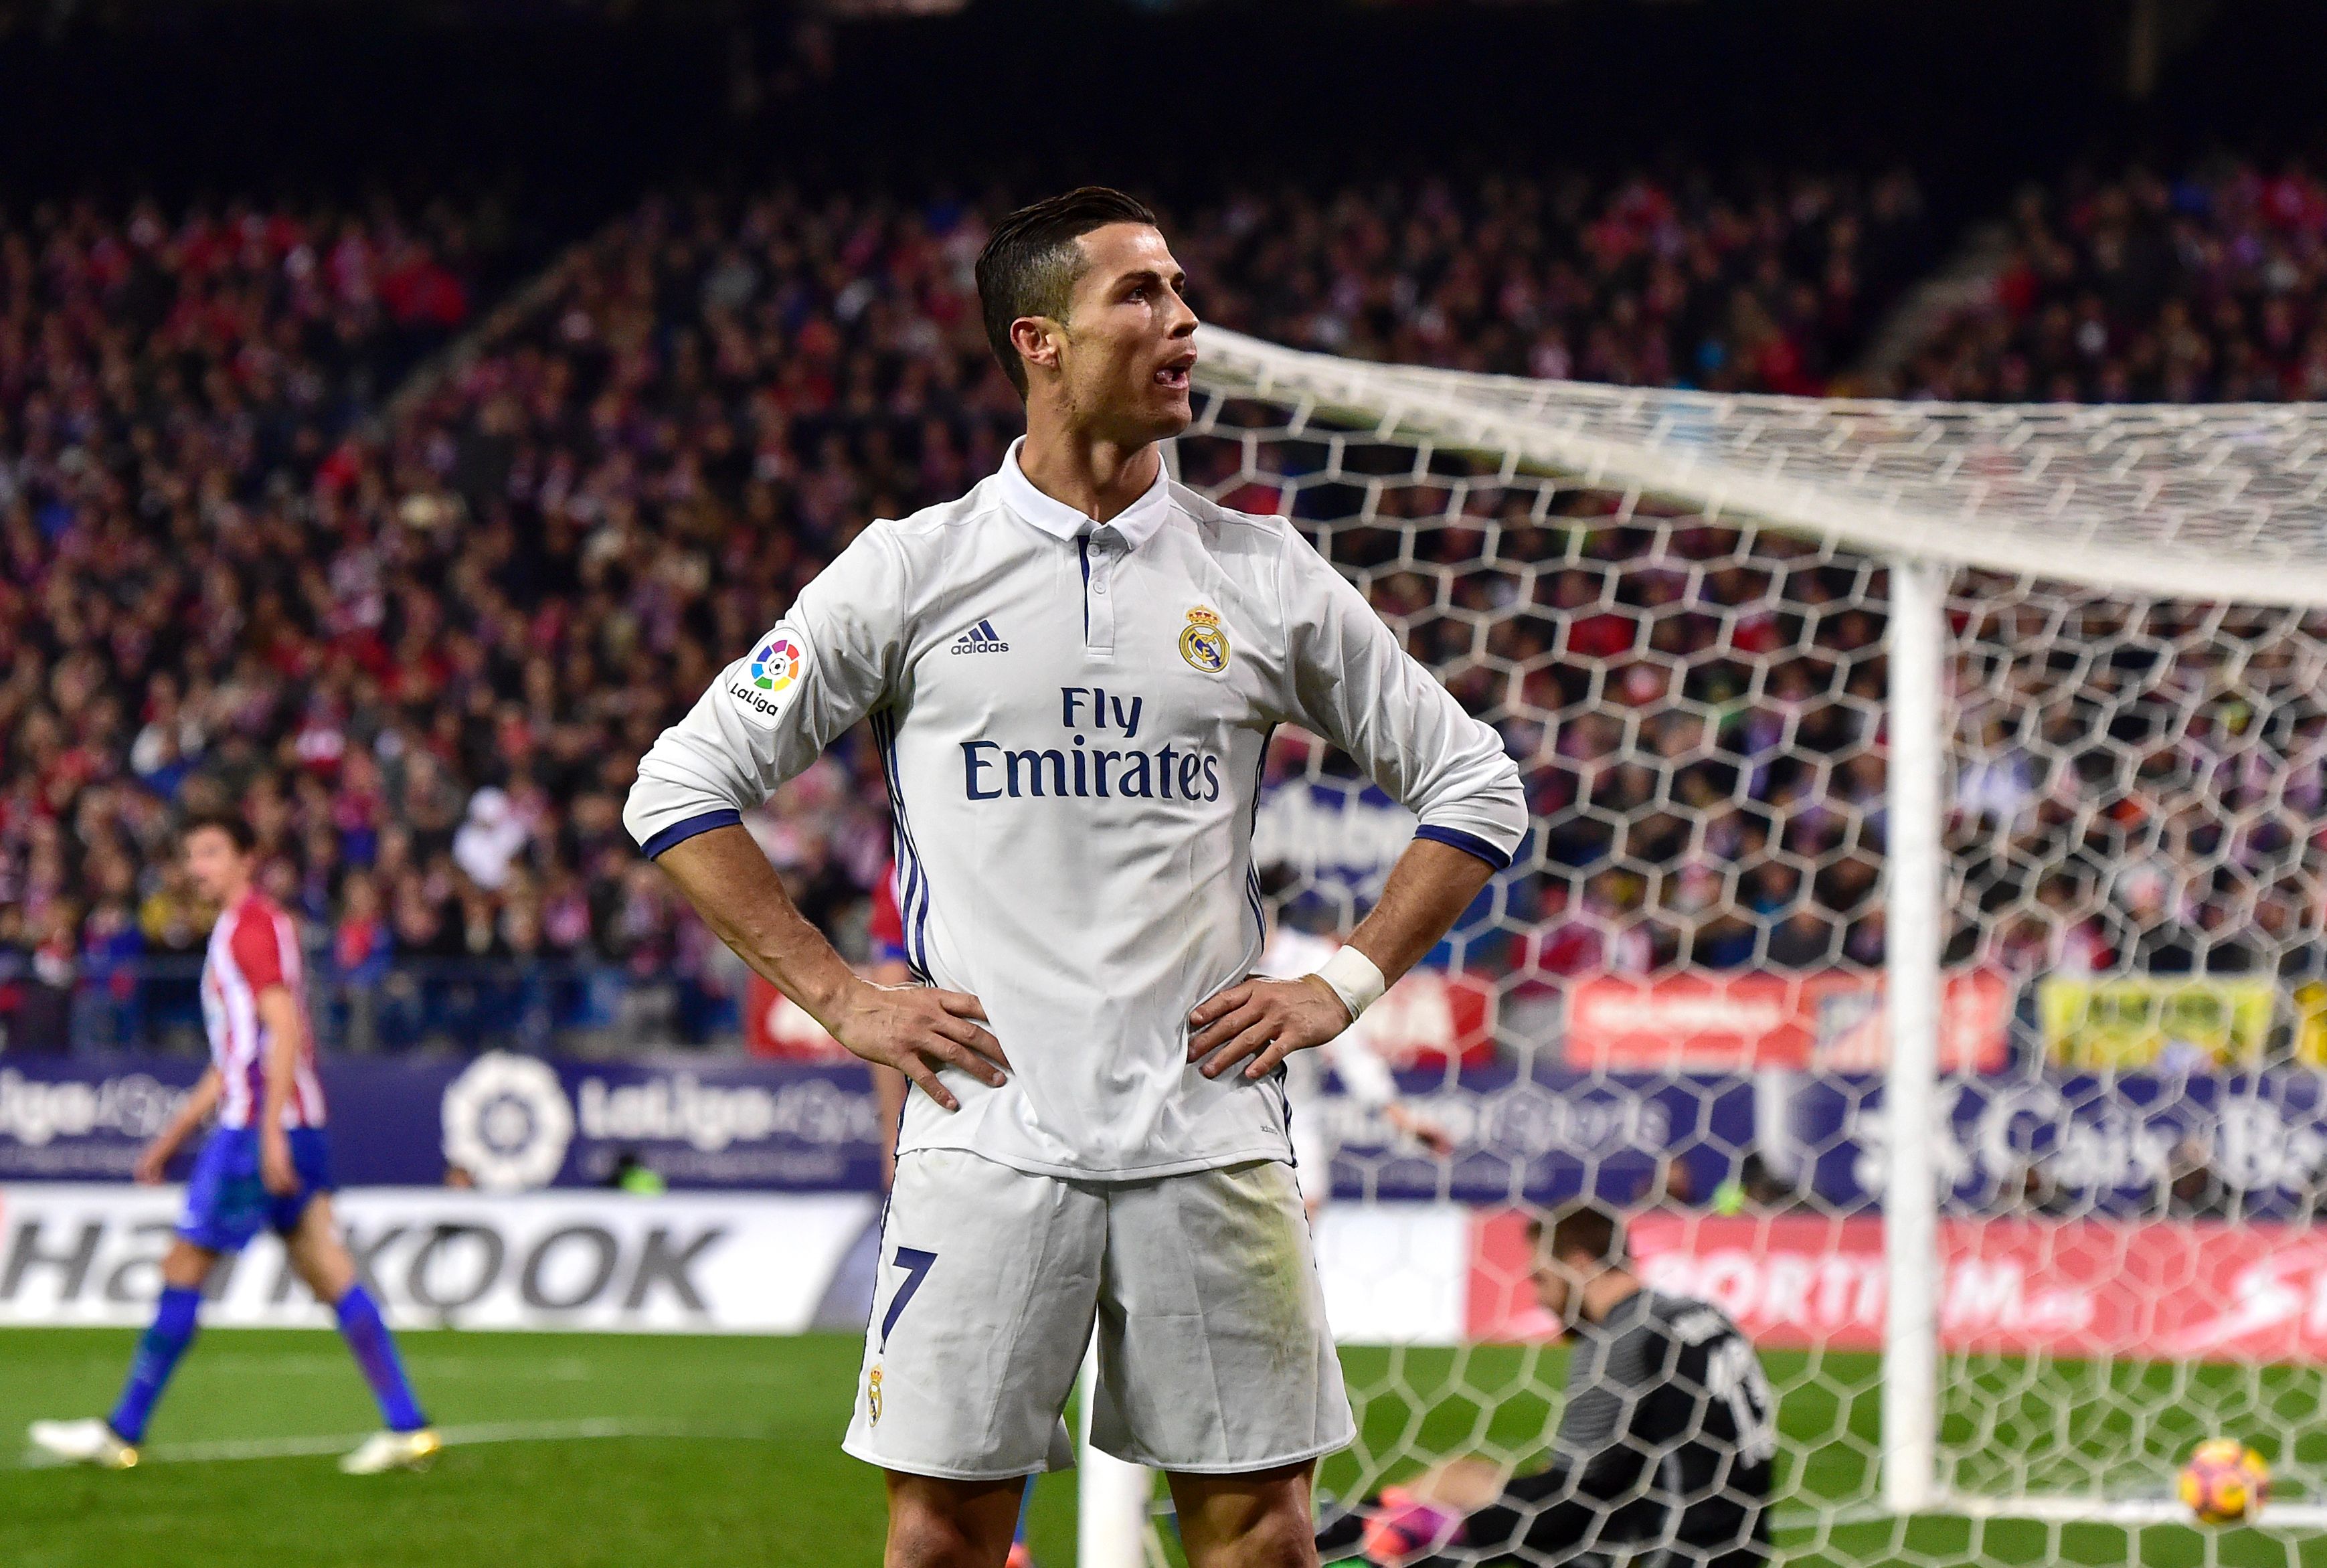 Real Madrid's Portuguese forward Cristiano Ronaldo celebrates after scoring his third goal during the Spanish league football match Club Atletico de Madrid vs Real Madrid CF at the Vicente Calderon stadium in Madrid, on November 19, 2016. Real Madrid won 3-0. / AFP / GERARD JULIEN        (Photo credit should read GERARD JULIEN/AFP/Getty Images)